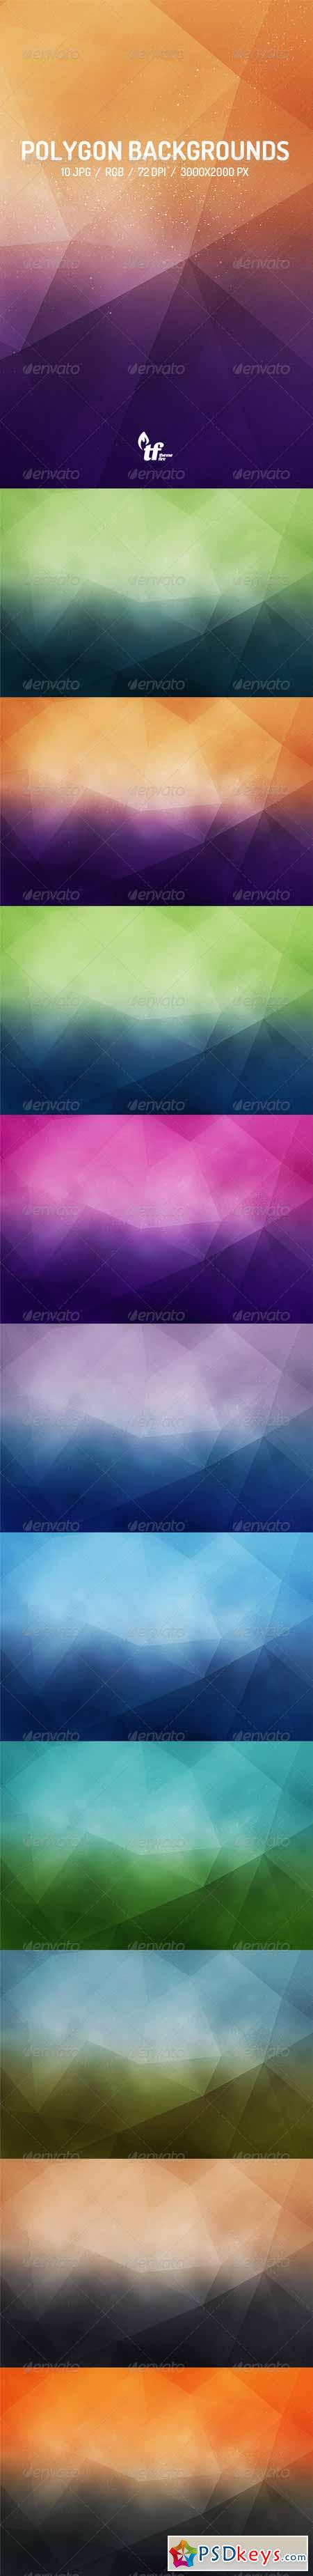 10 Polygon Backgrounds 7690224